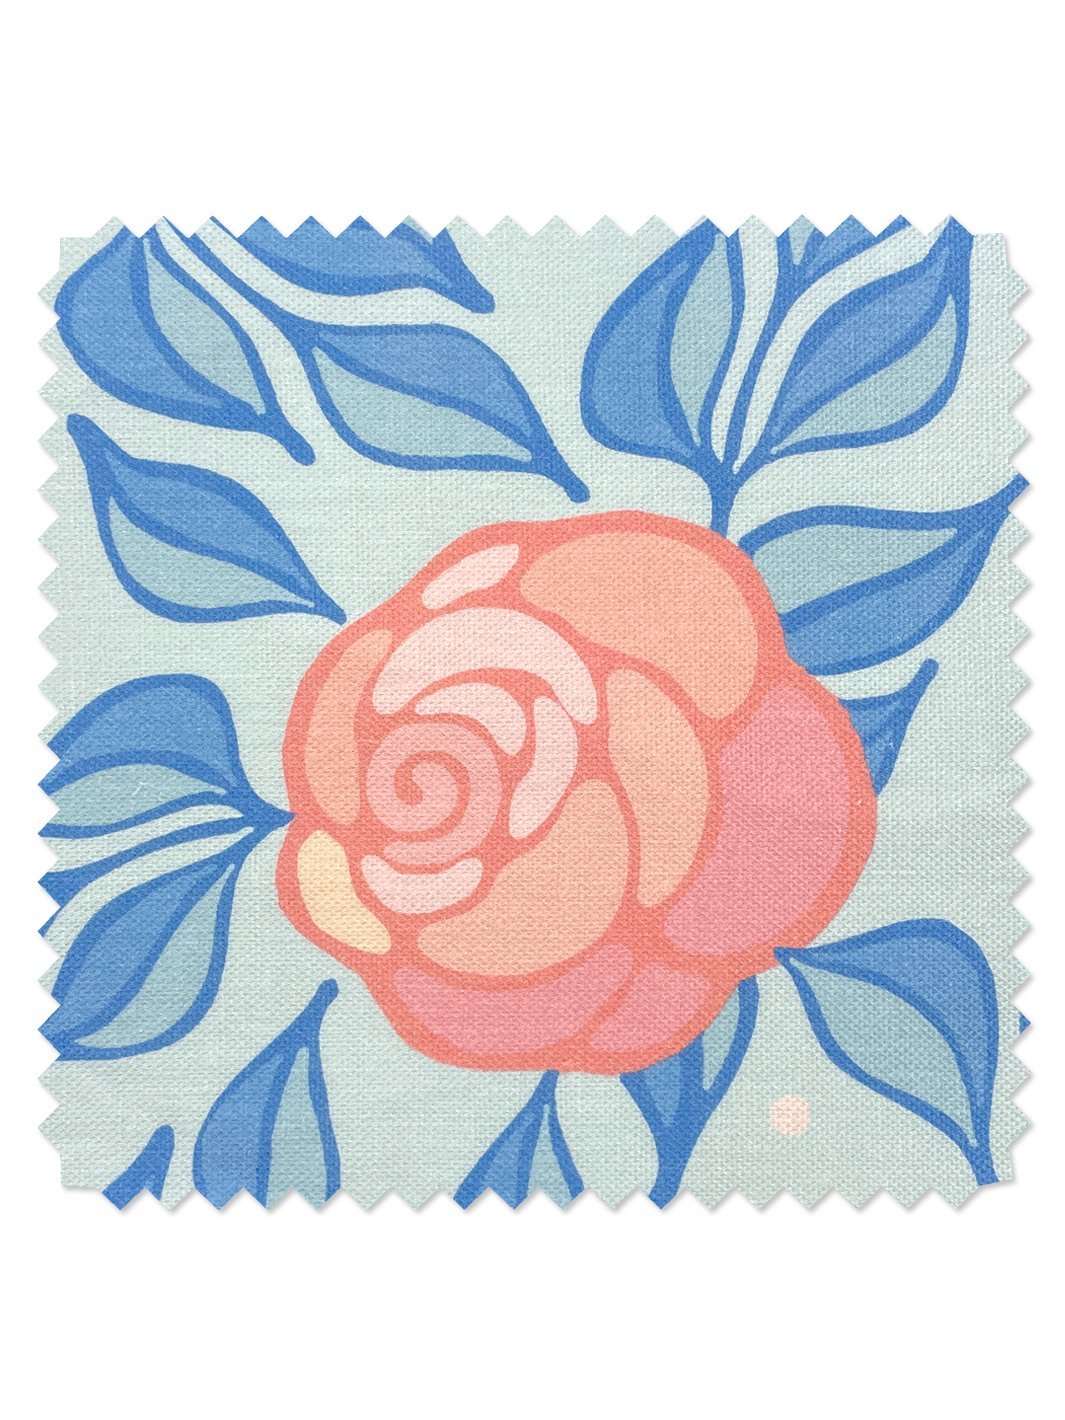 'Fabric by the Yard - Groovy Floral - Baby Blue